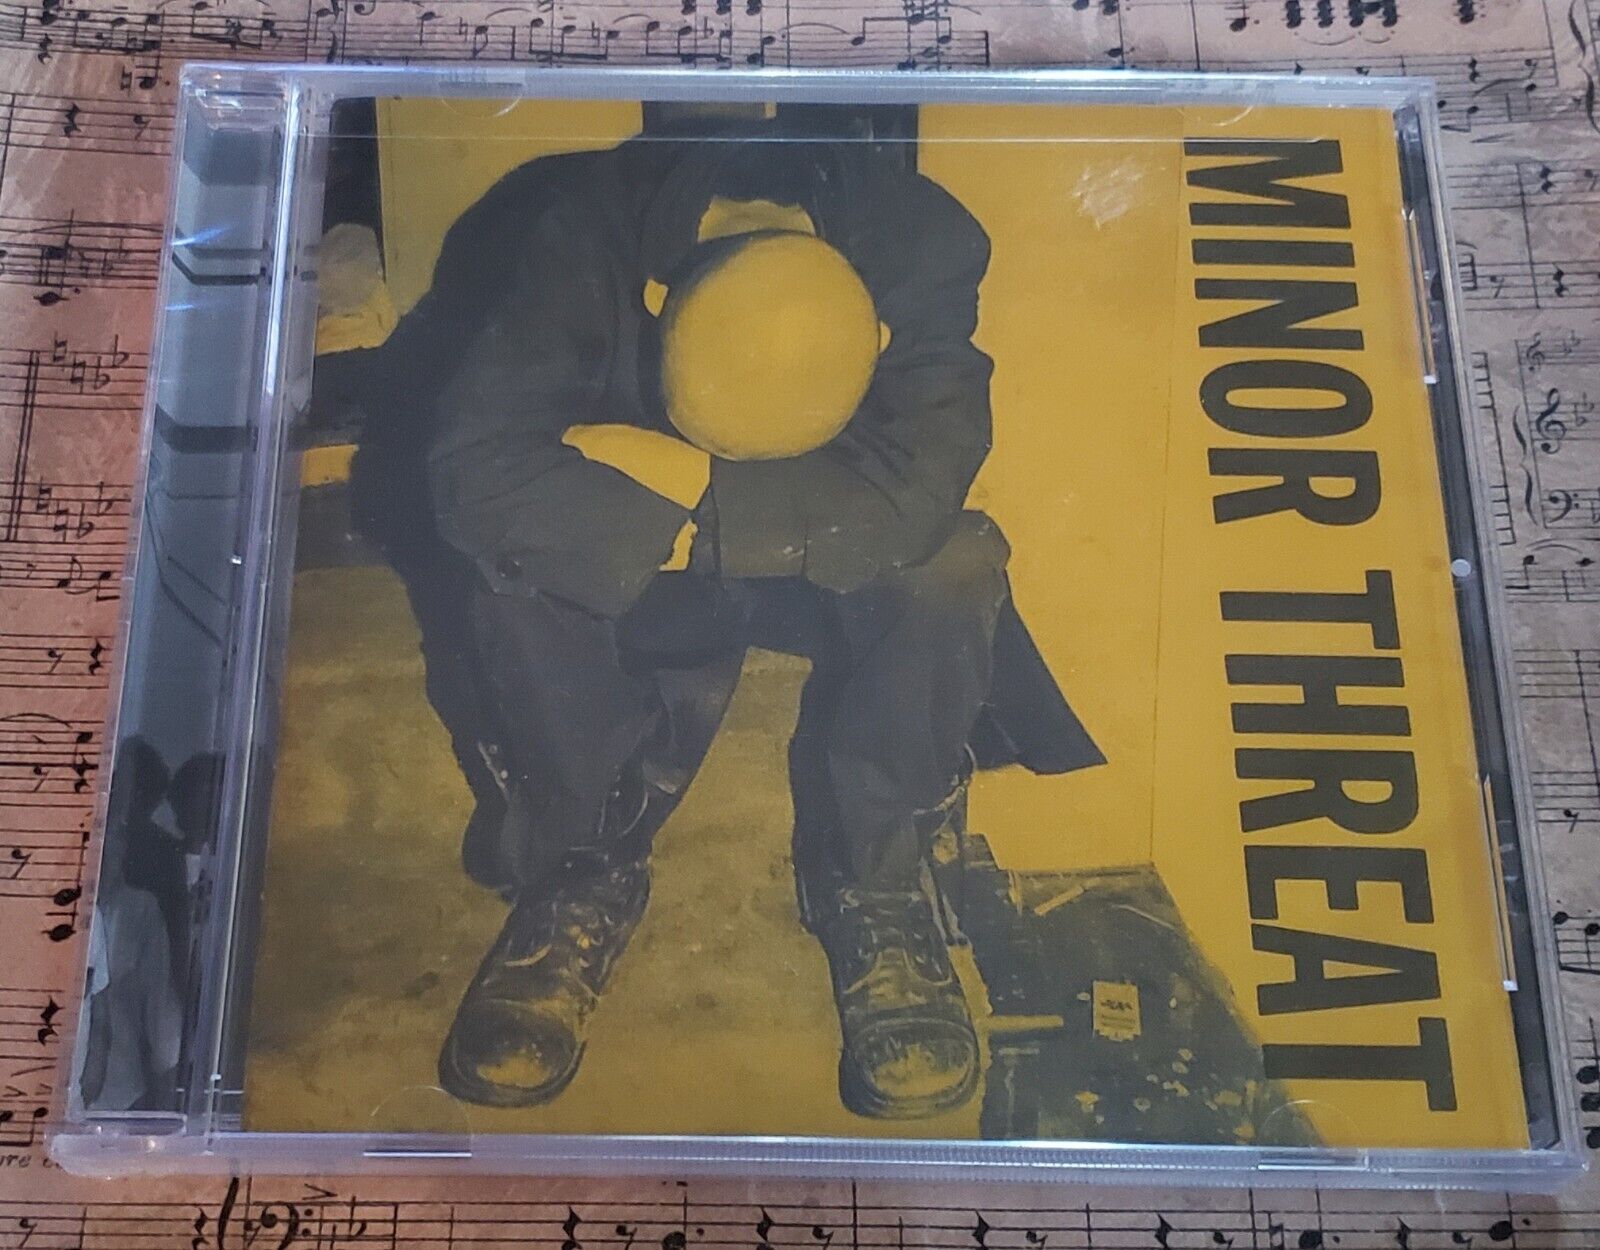 Minor Threat - Complete Discography CD 1989/2003 Brand New SEALED Dischord 40